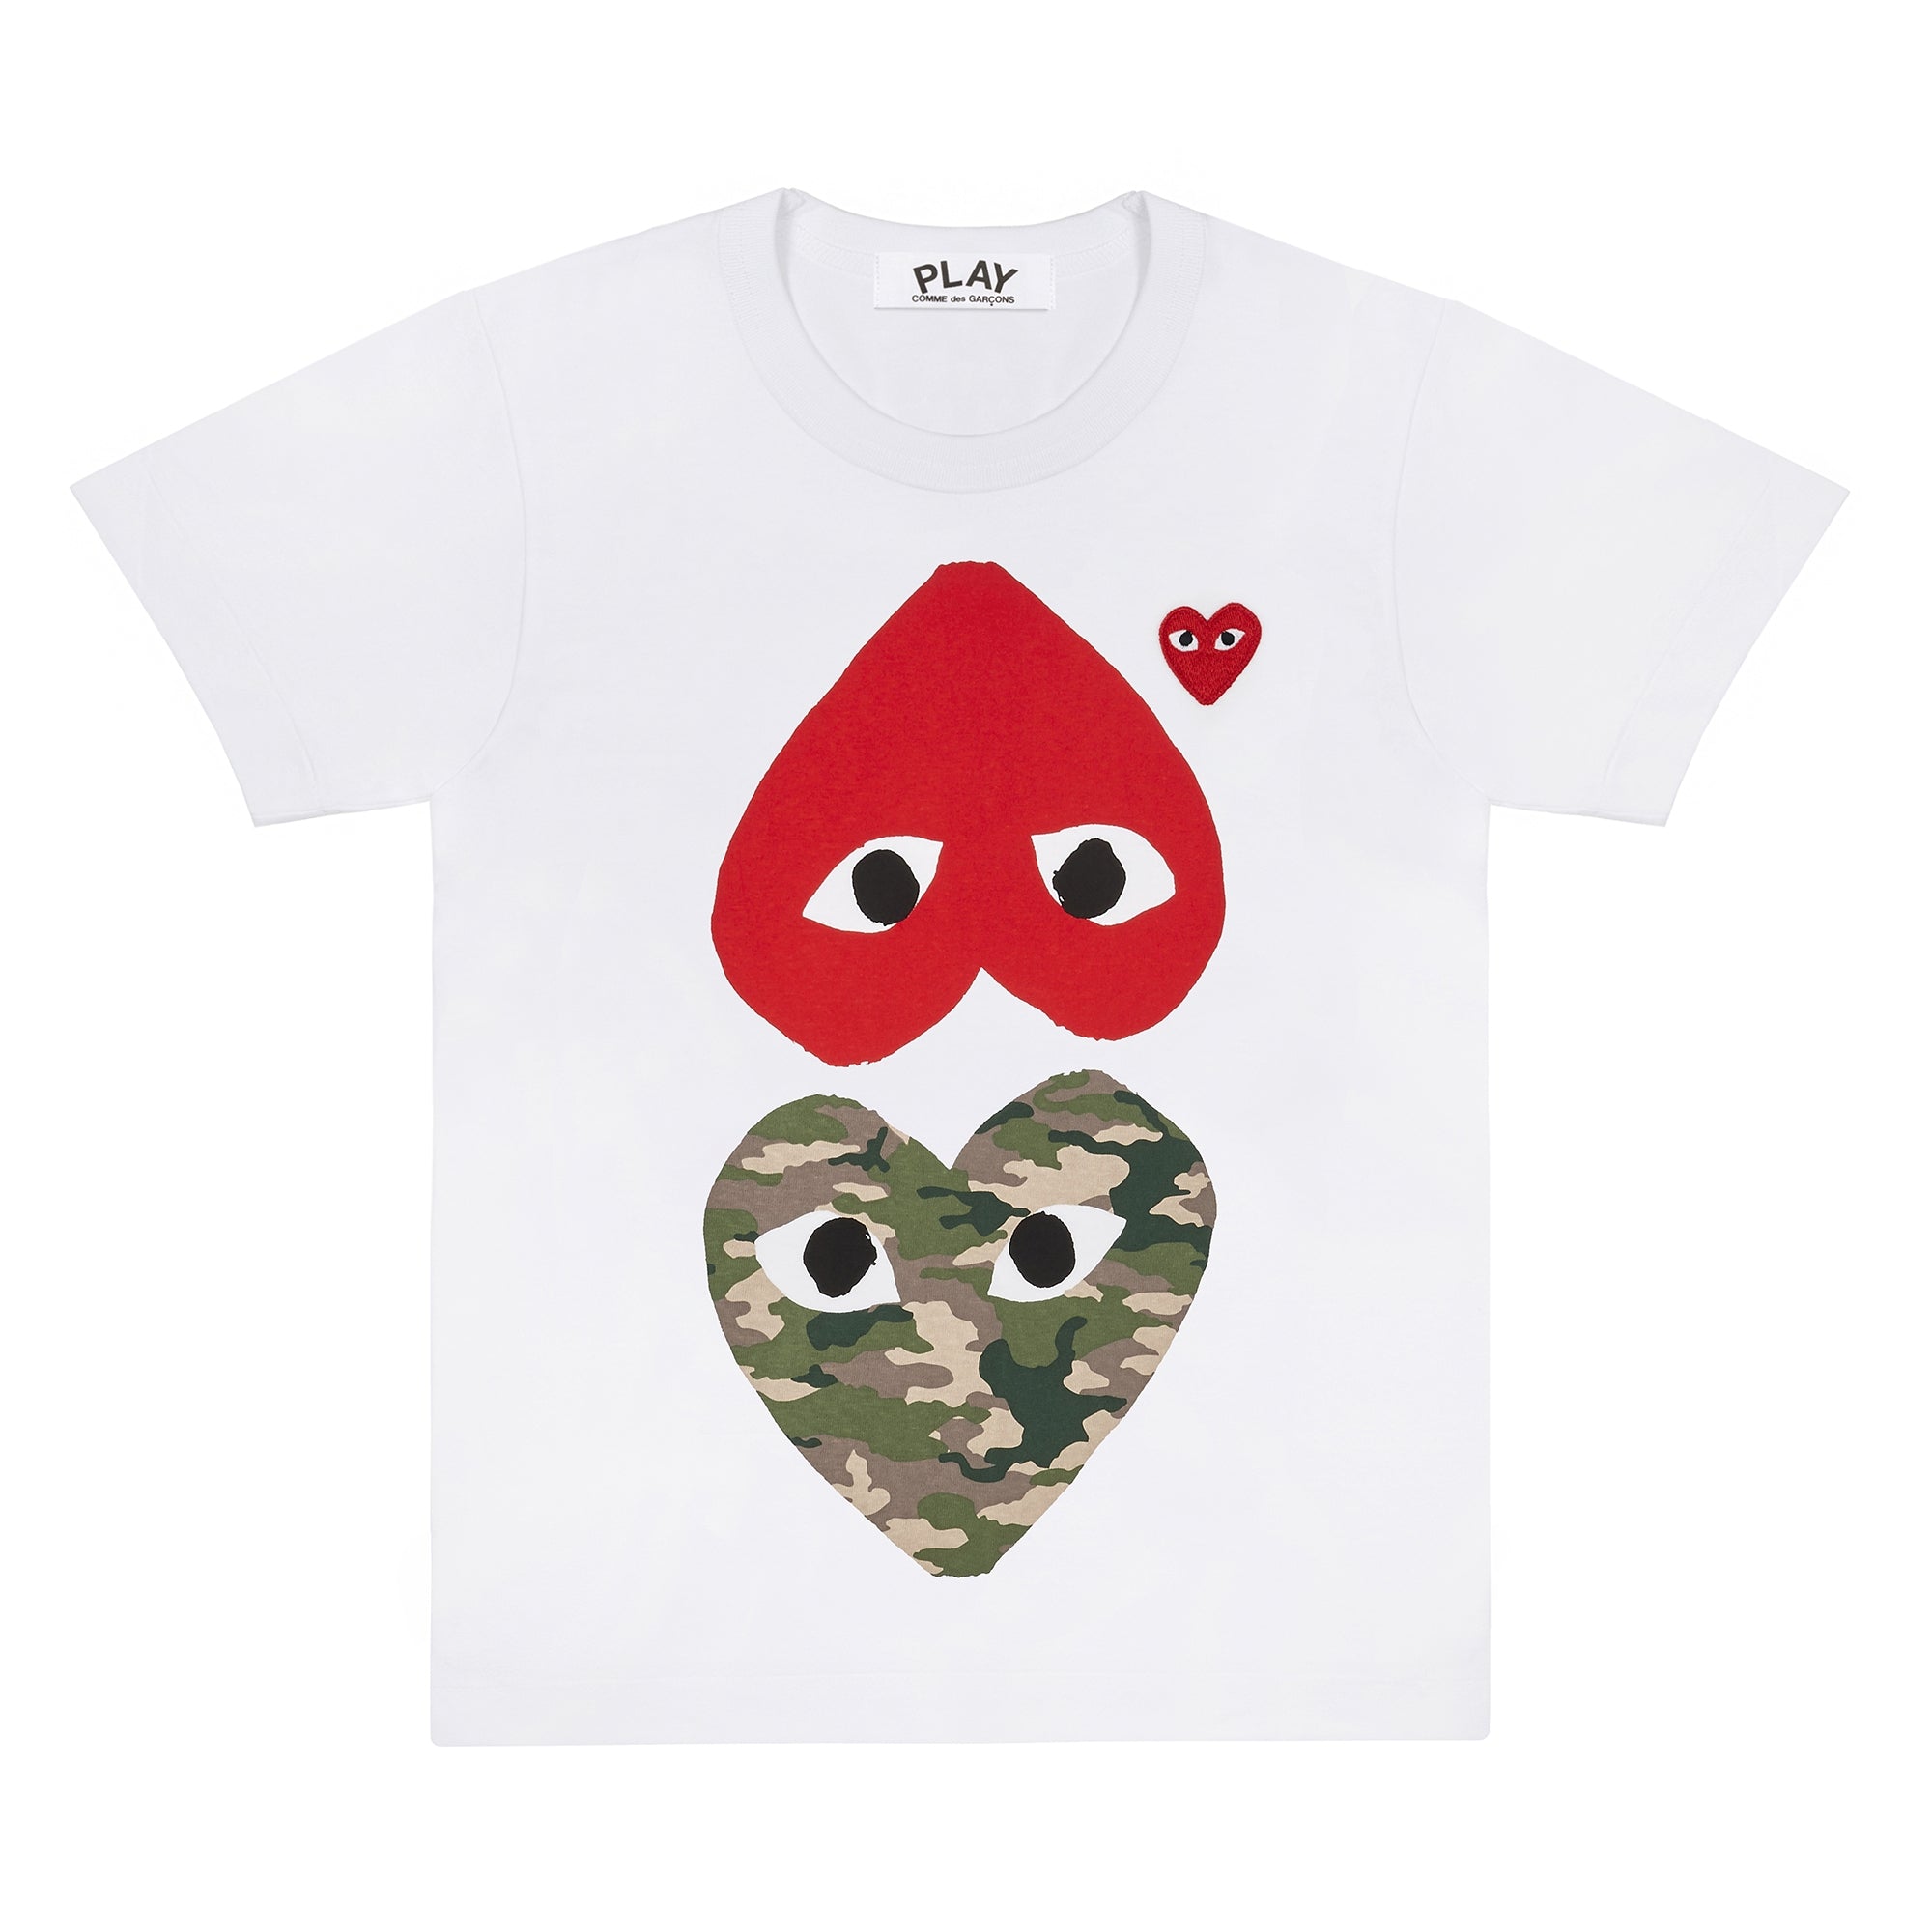 PLAY CDG - Camouflage With Upside Down Heart T-Shirt - (White) view 1